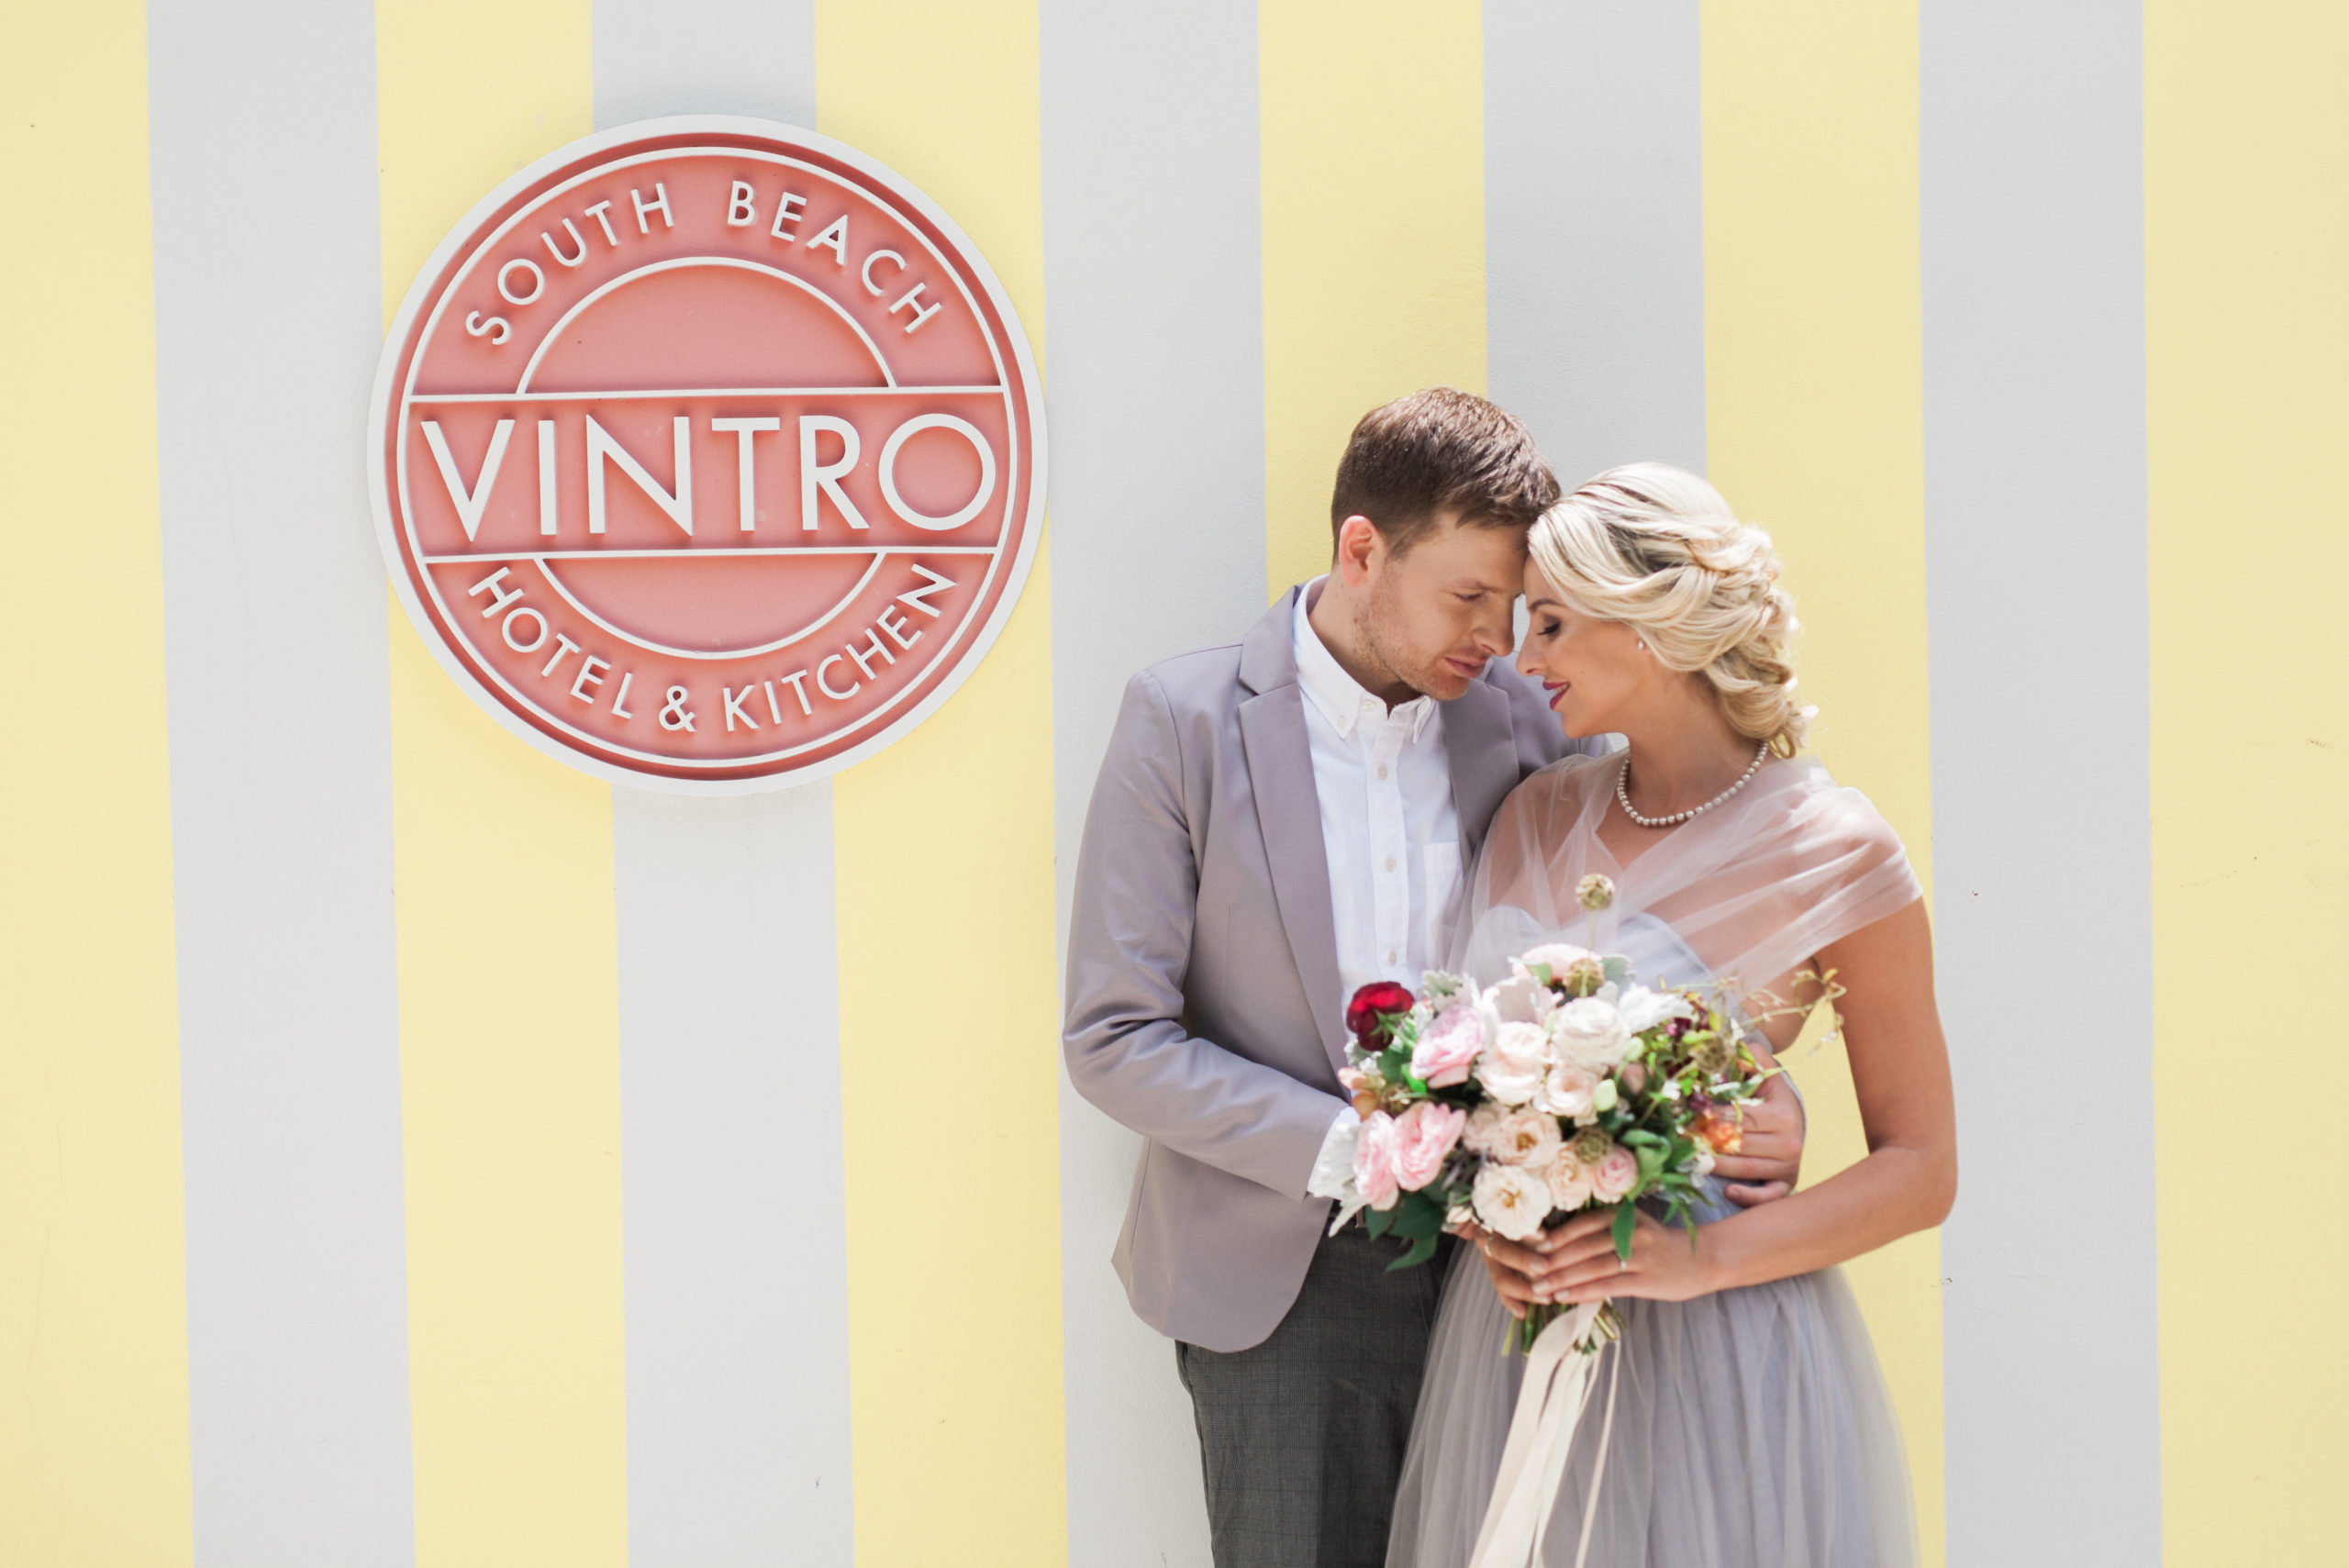 Vintro Hotel in Miami Beach was the perfect setting for this Lady and the Tramp wedding inspiration